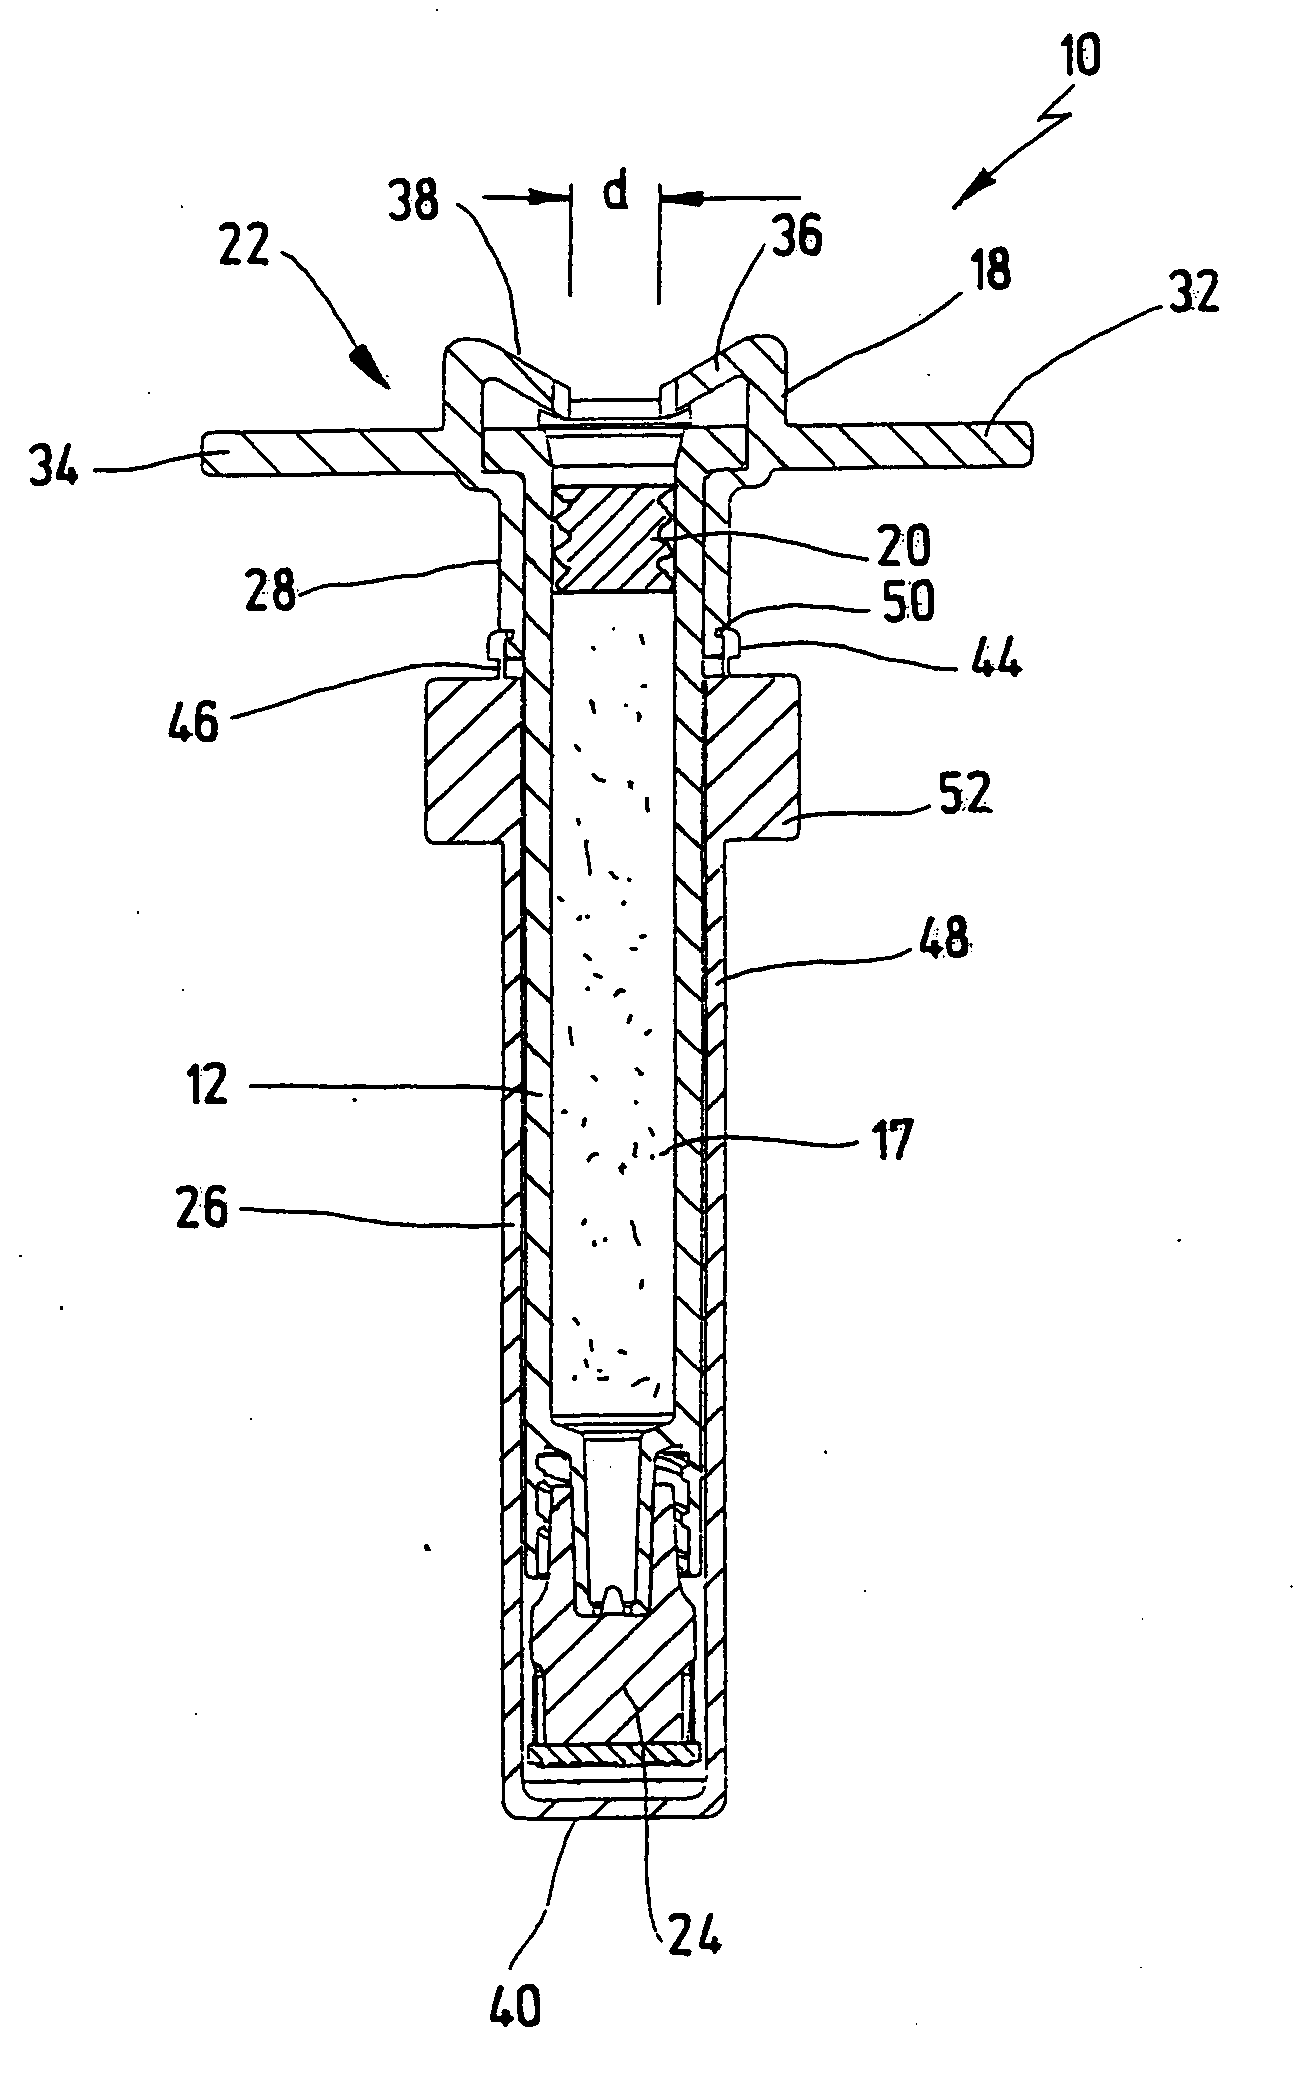 Arrangement for storing, transporting and administering a liquid